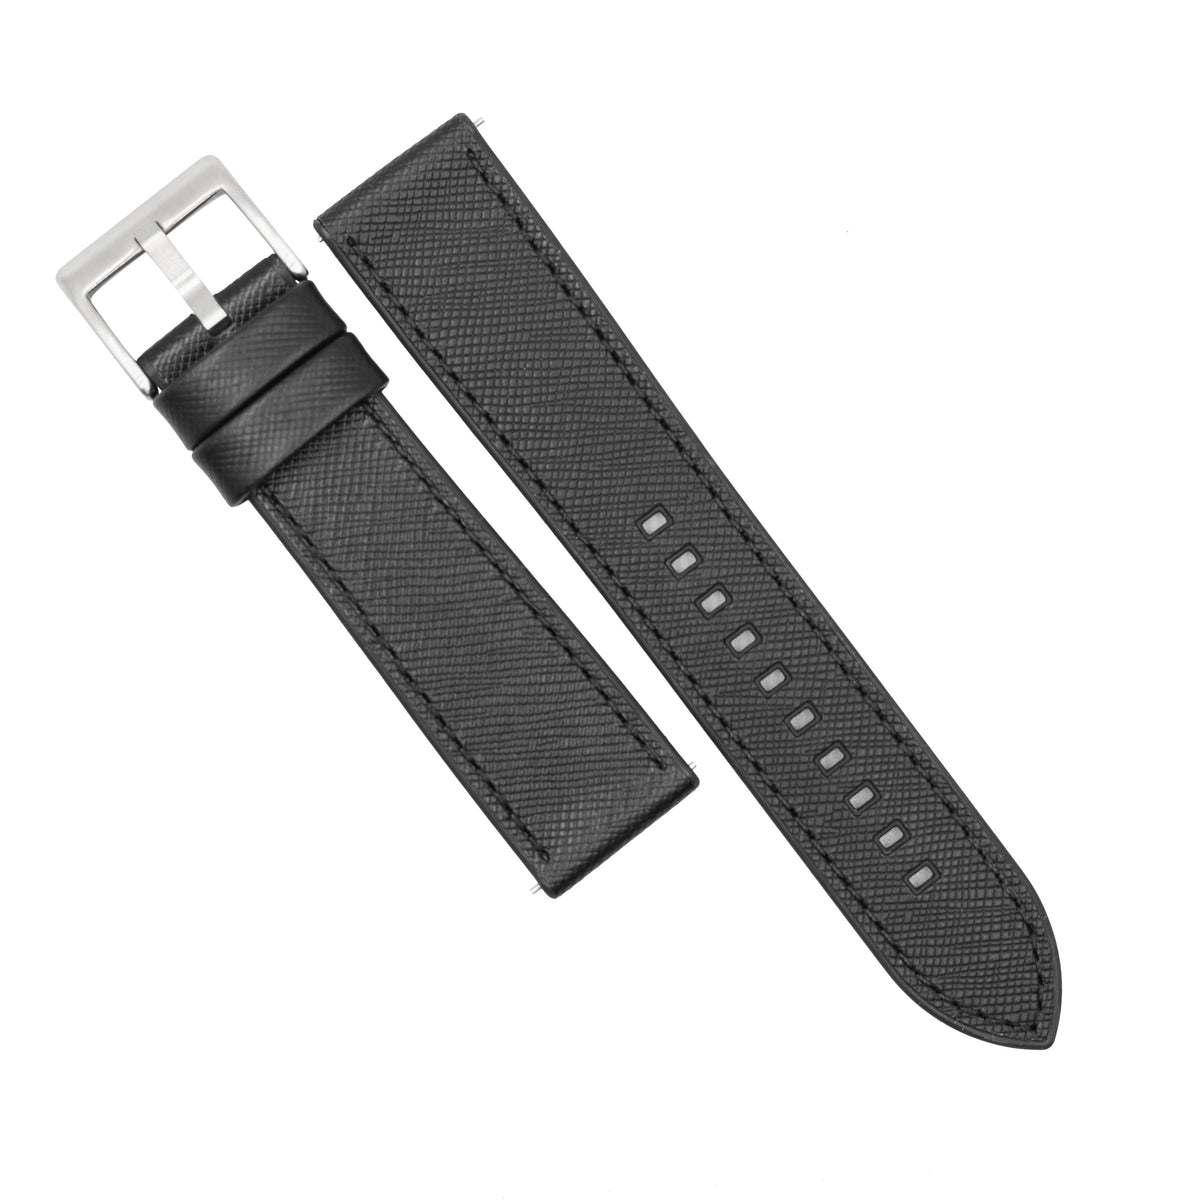 Performax Saffiano Leather FKM Rubber Hybrid Strap in Black (20mm) - Nomad Watch Works MY